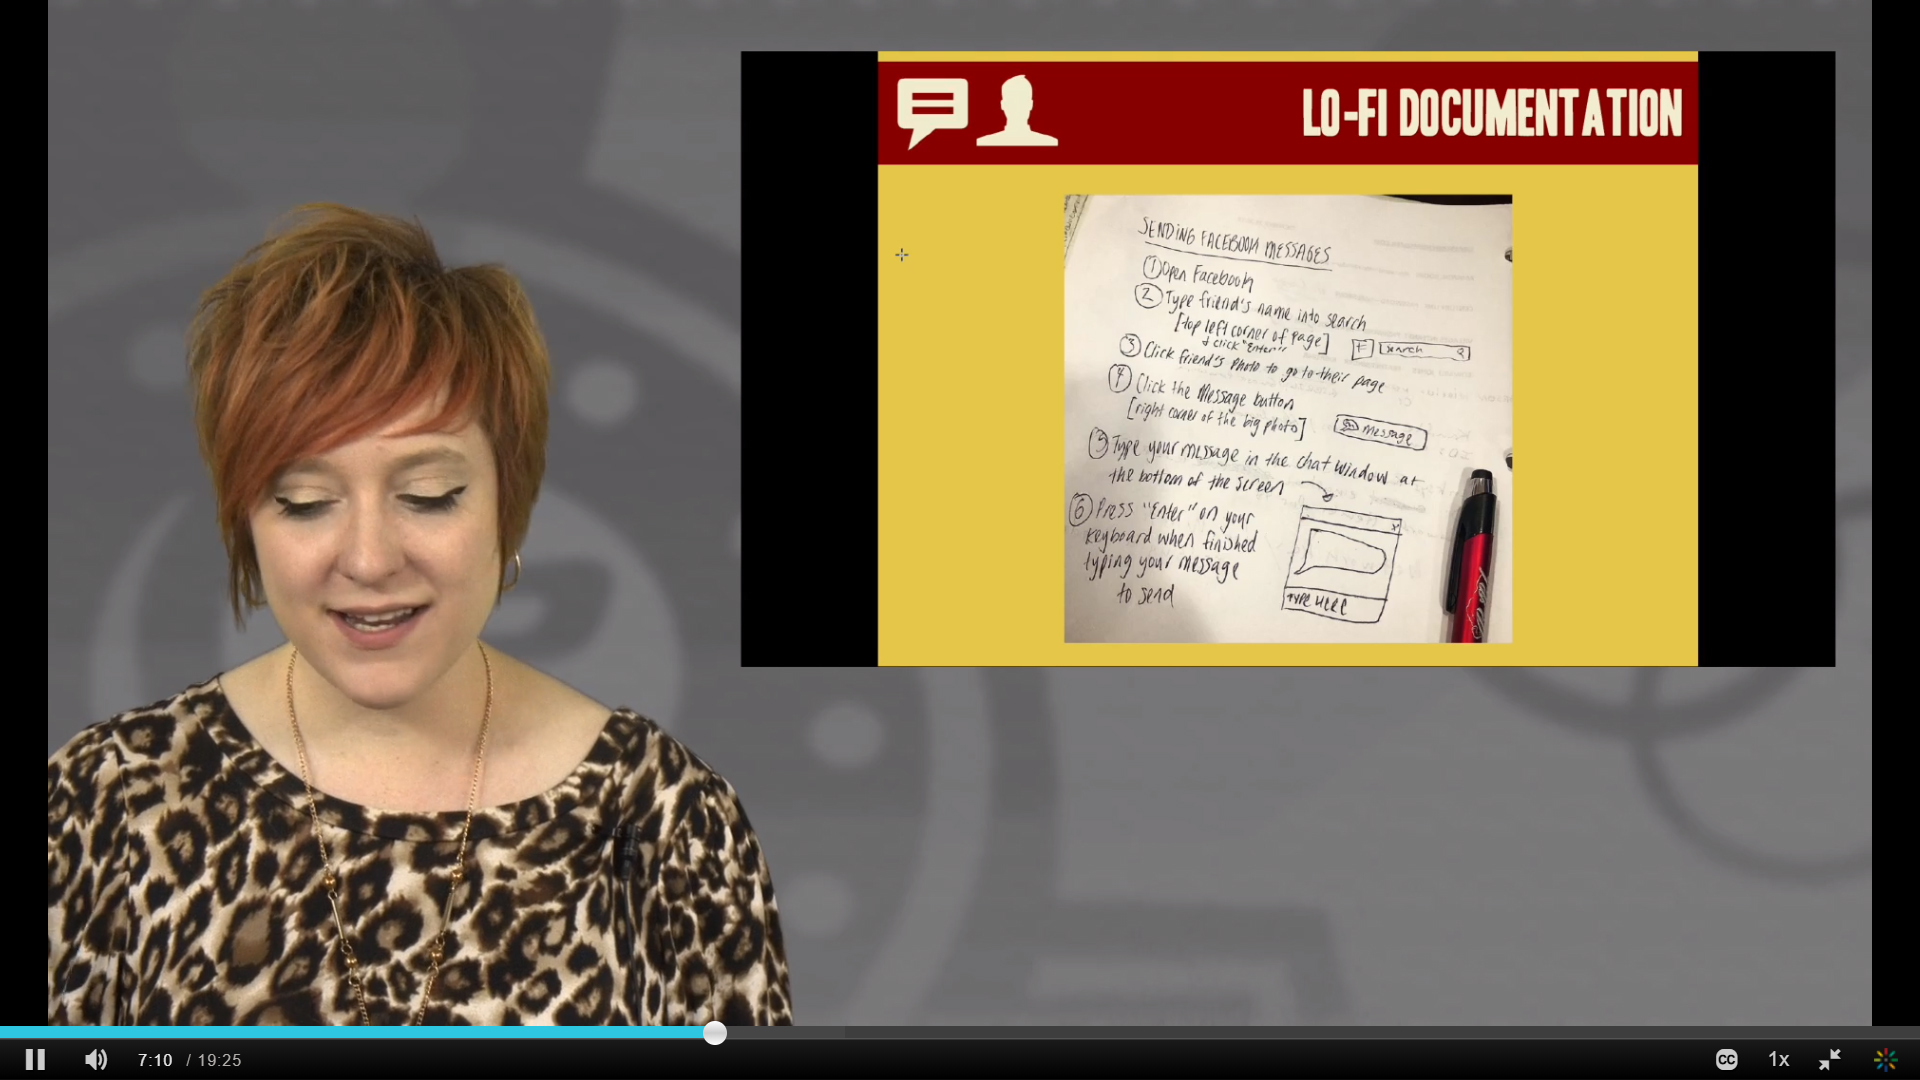 A screenshot of Allegra, a white woman with short red hair, teaching a video lesson on writing documentation. A slide with the title "lo-fi documentation" is projected behind her, with a picture of sketched-out instructions on how to send a Facebook message